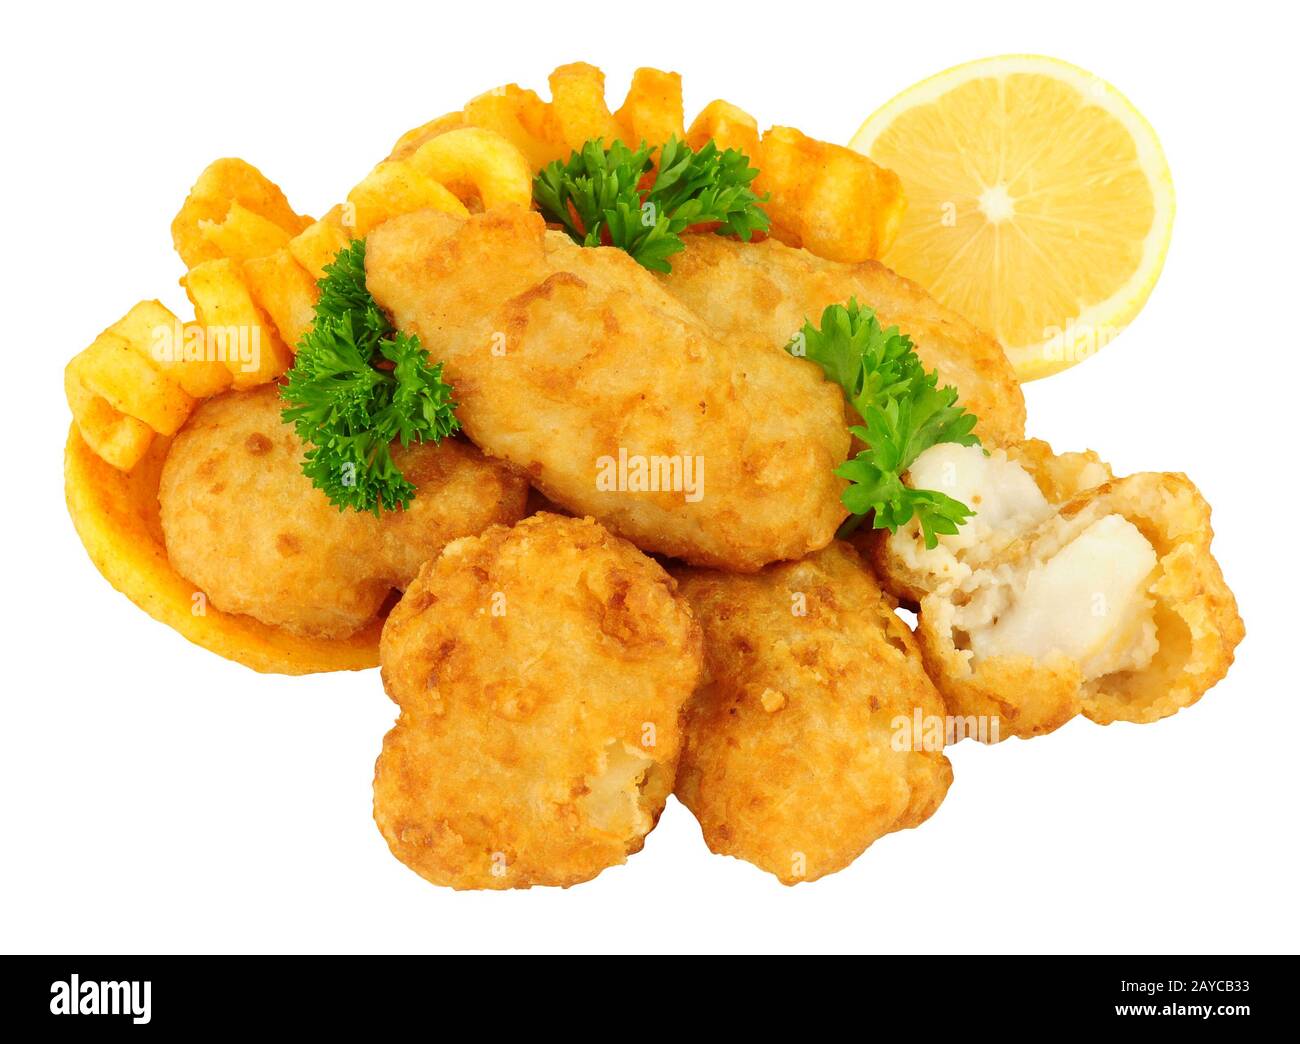 Battered cod fish nugget bites with curly fries isolated on a white  background Stock Photo - Alamy